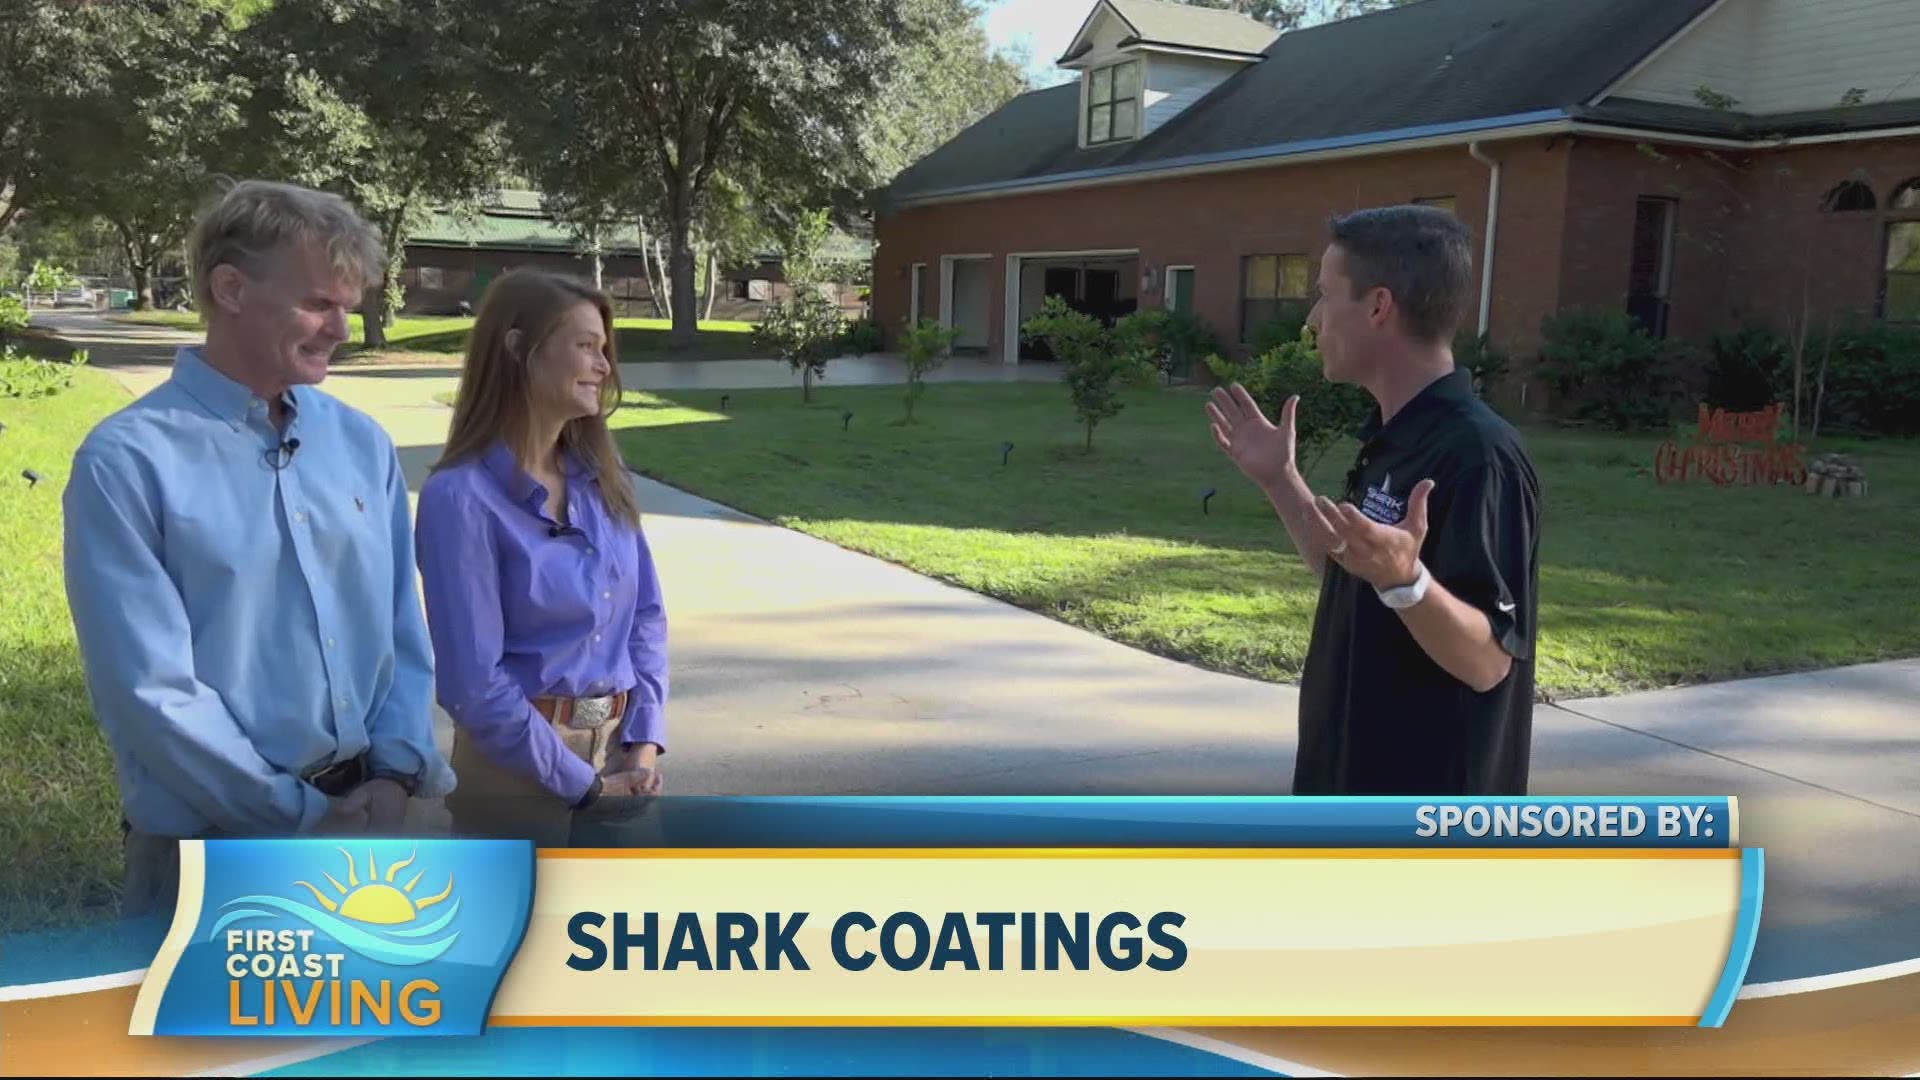 Ted and Elizabeth revamped their driveway with the help of Shark Coatings.